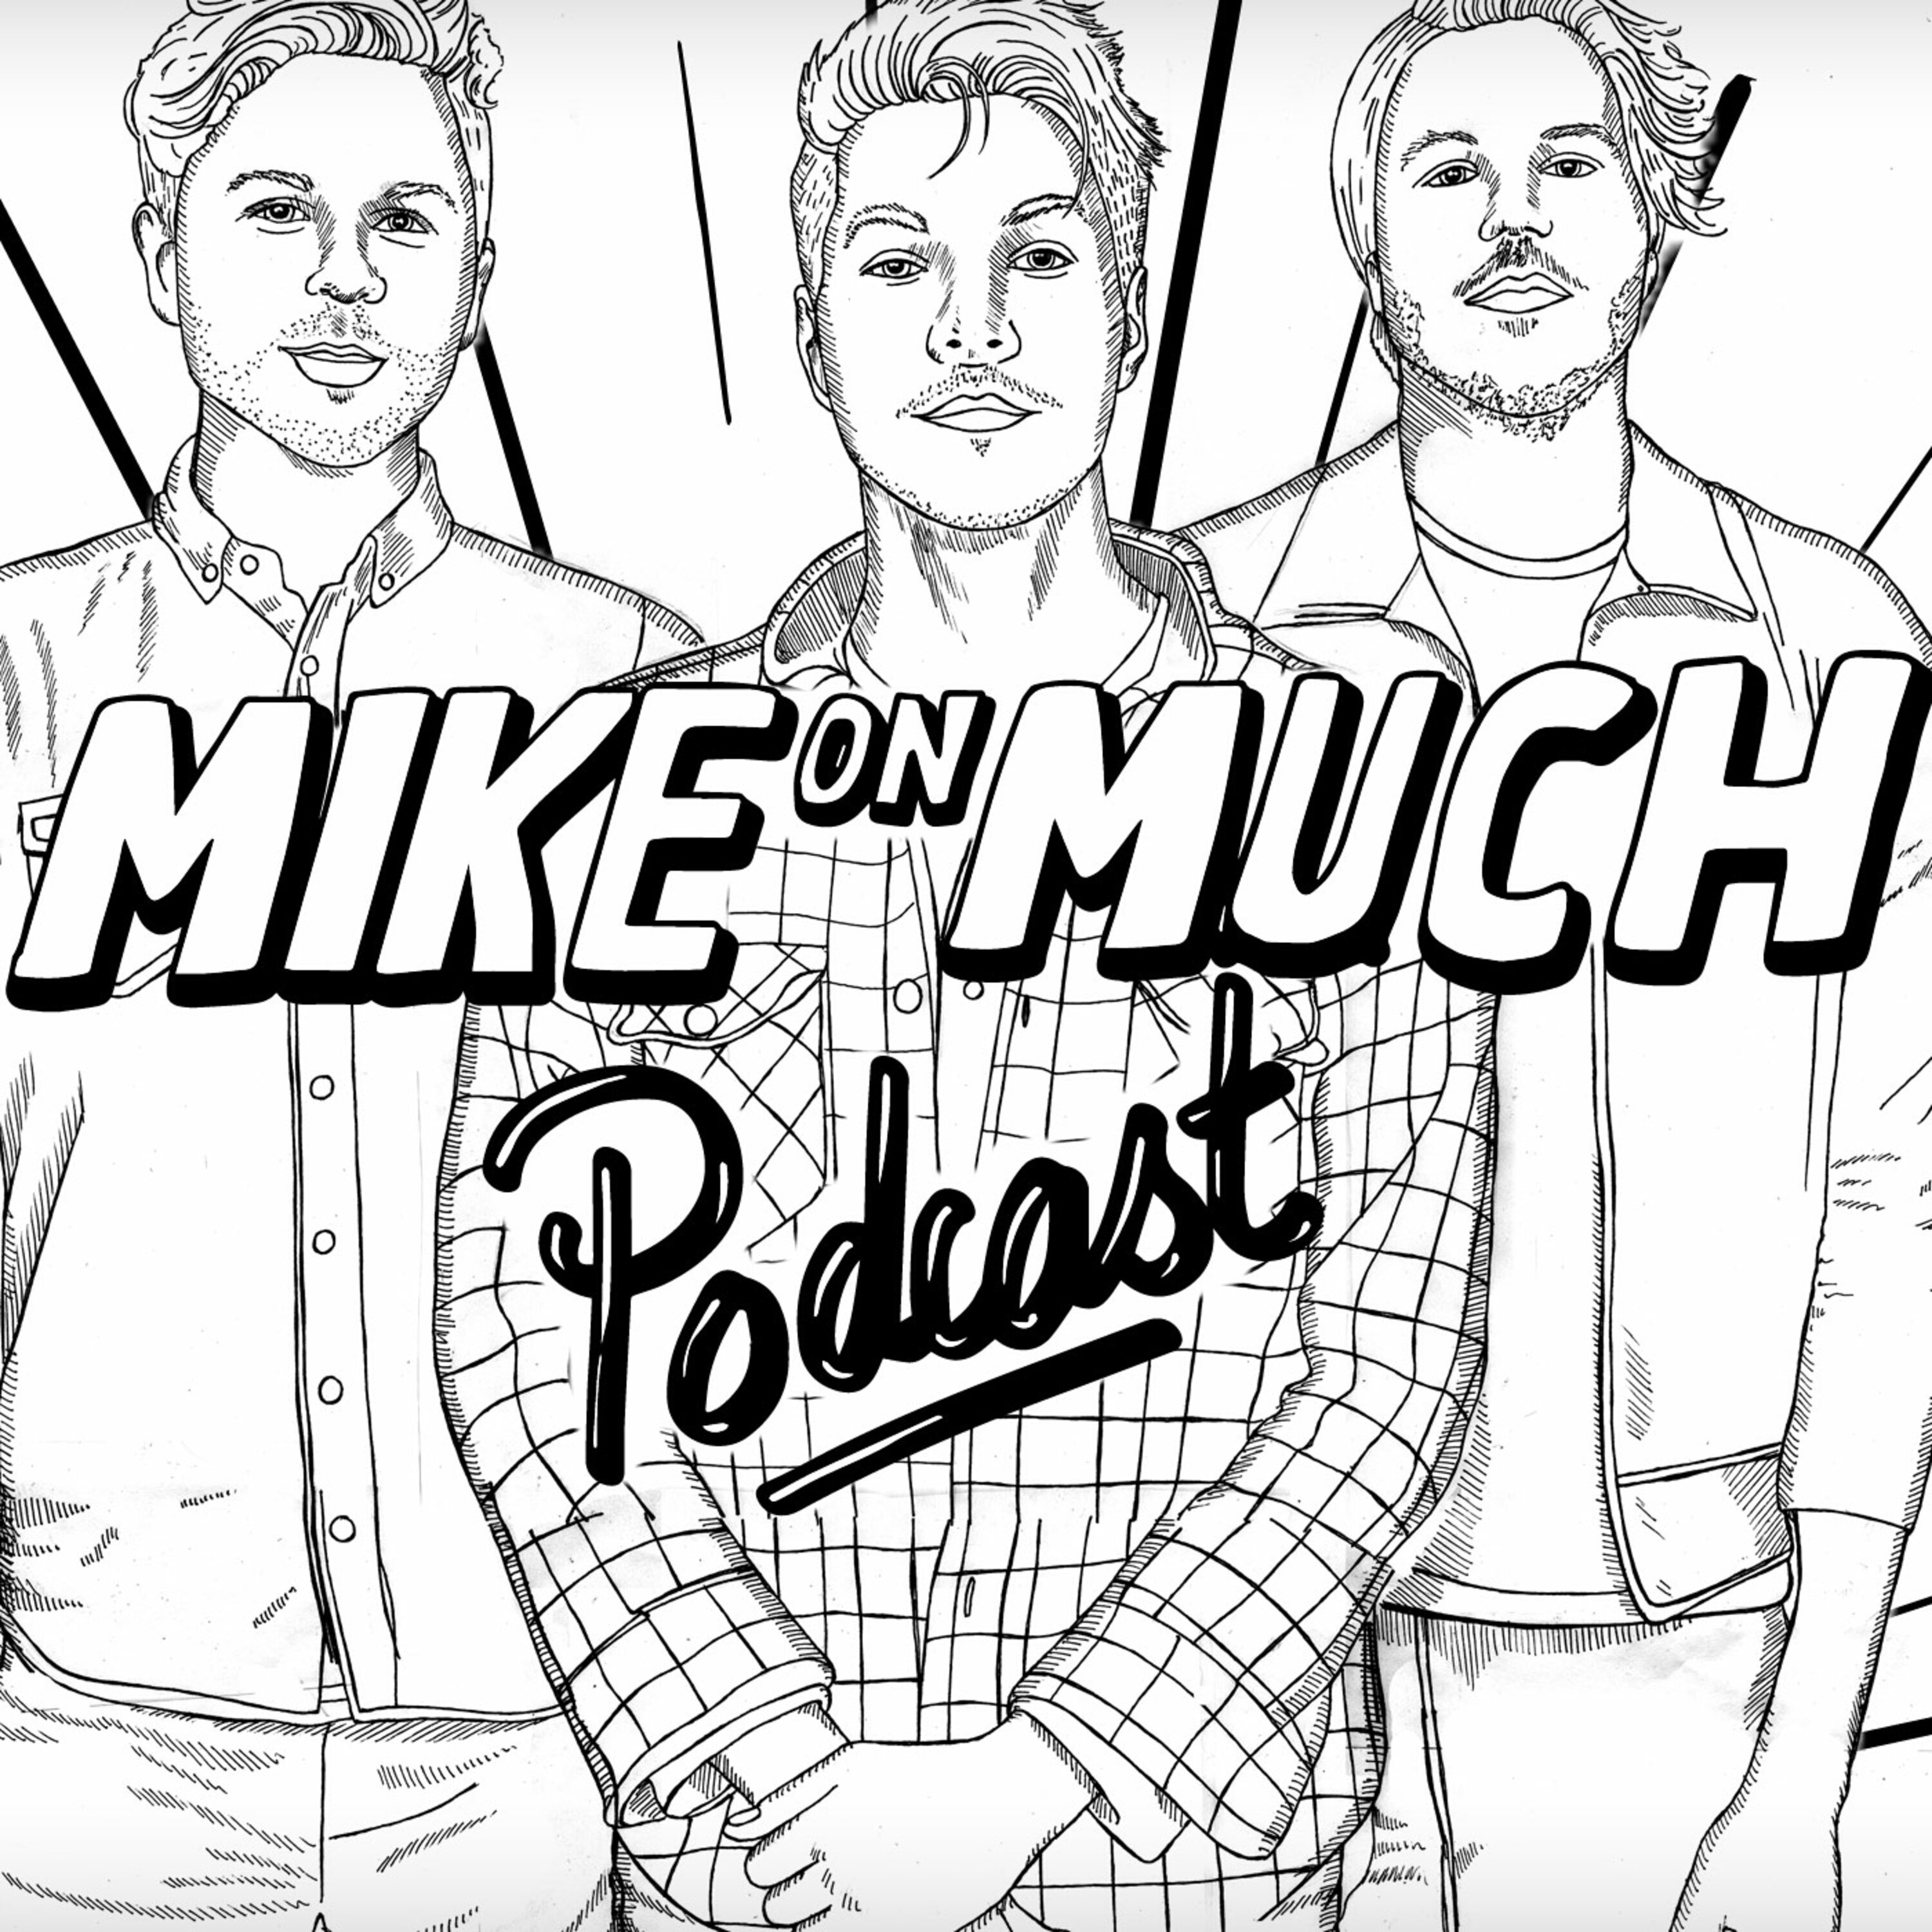 Season 1 Mike On Much: ”He’s Got The Launch Codes”